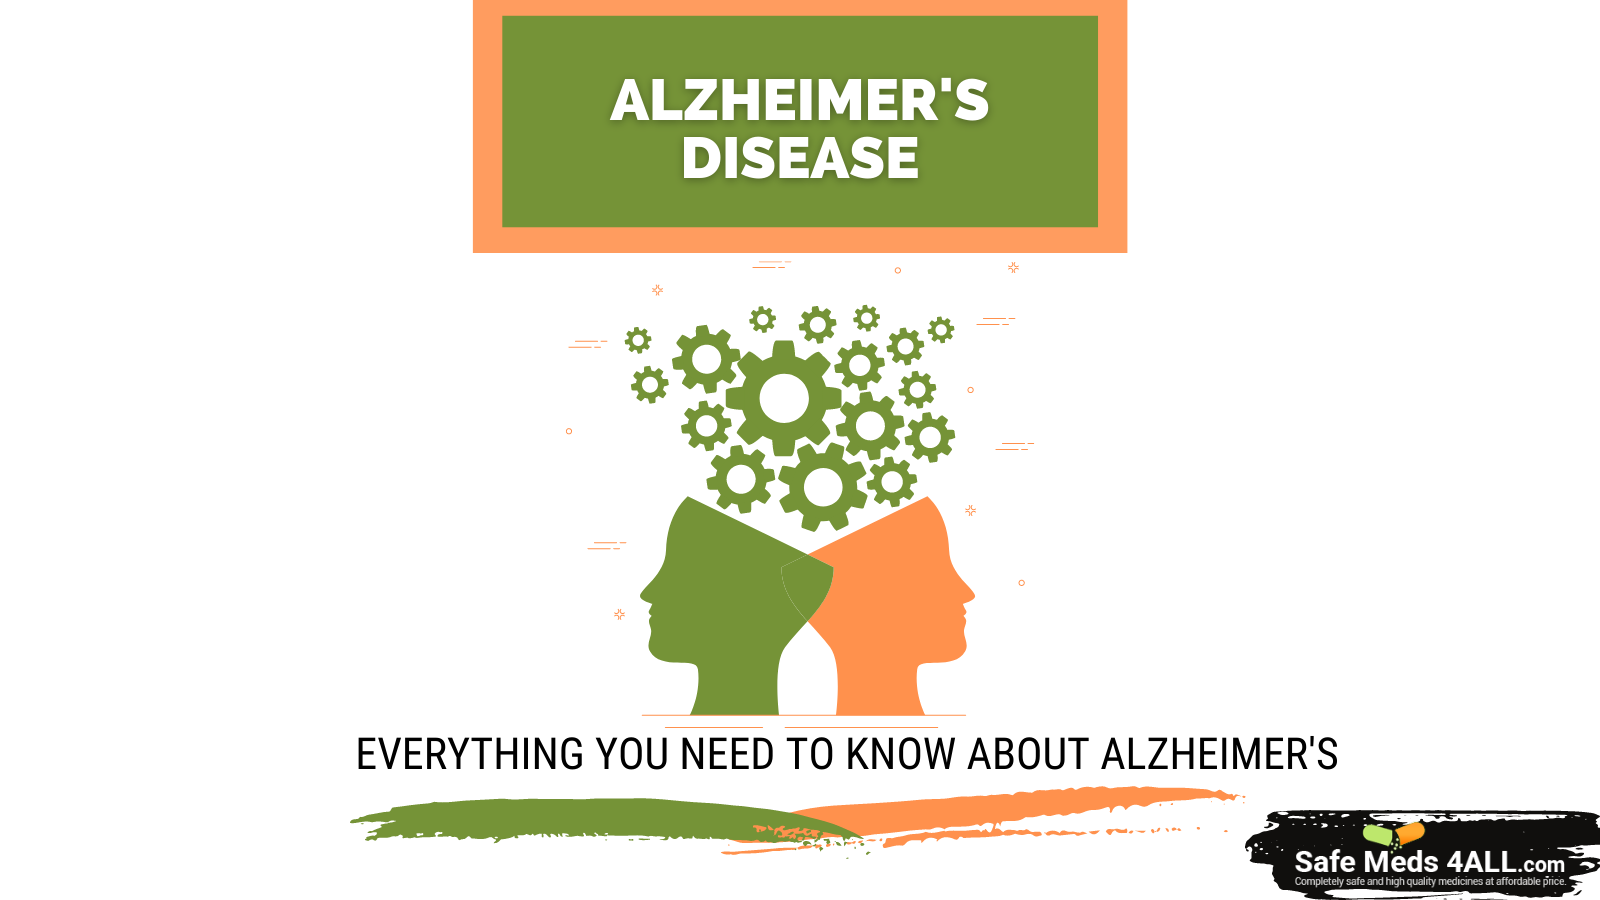 Alzheimer's disease causes, treatments and symptoms